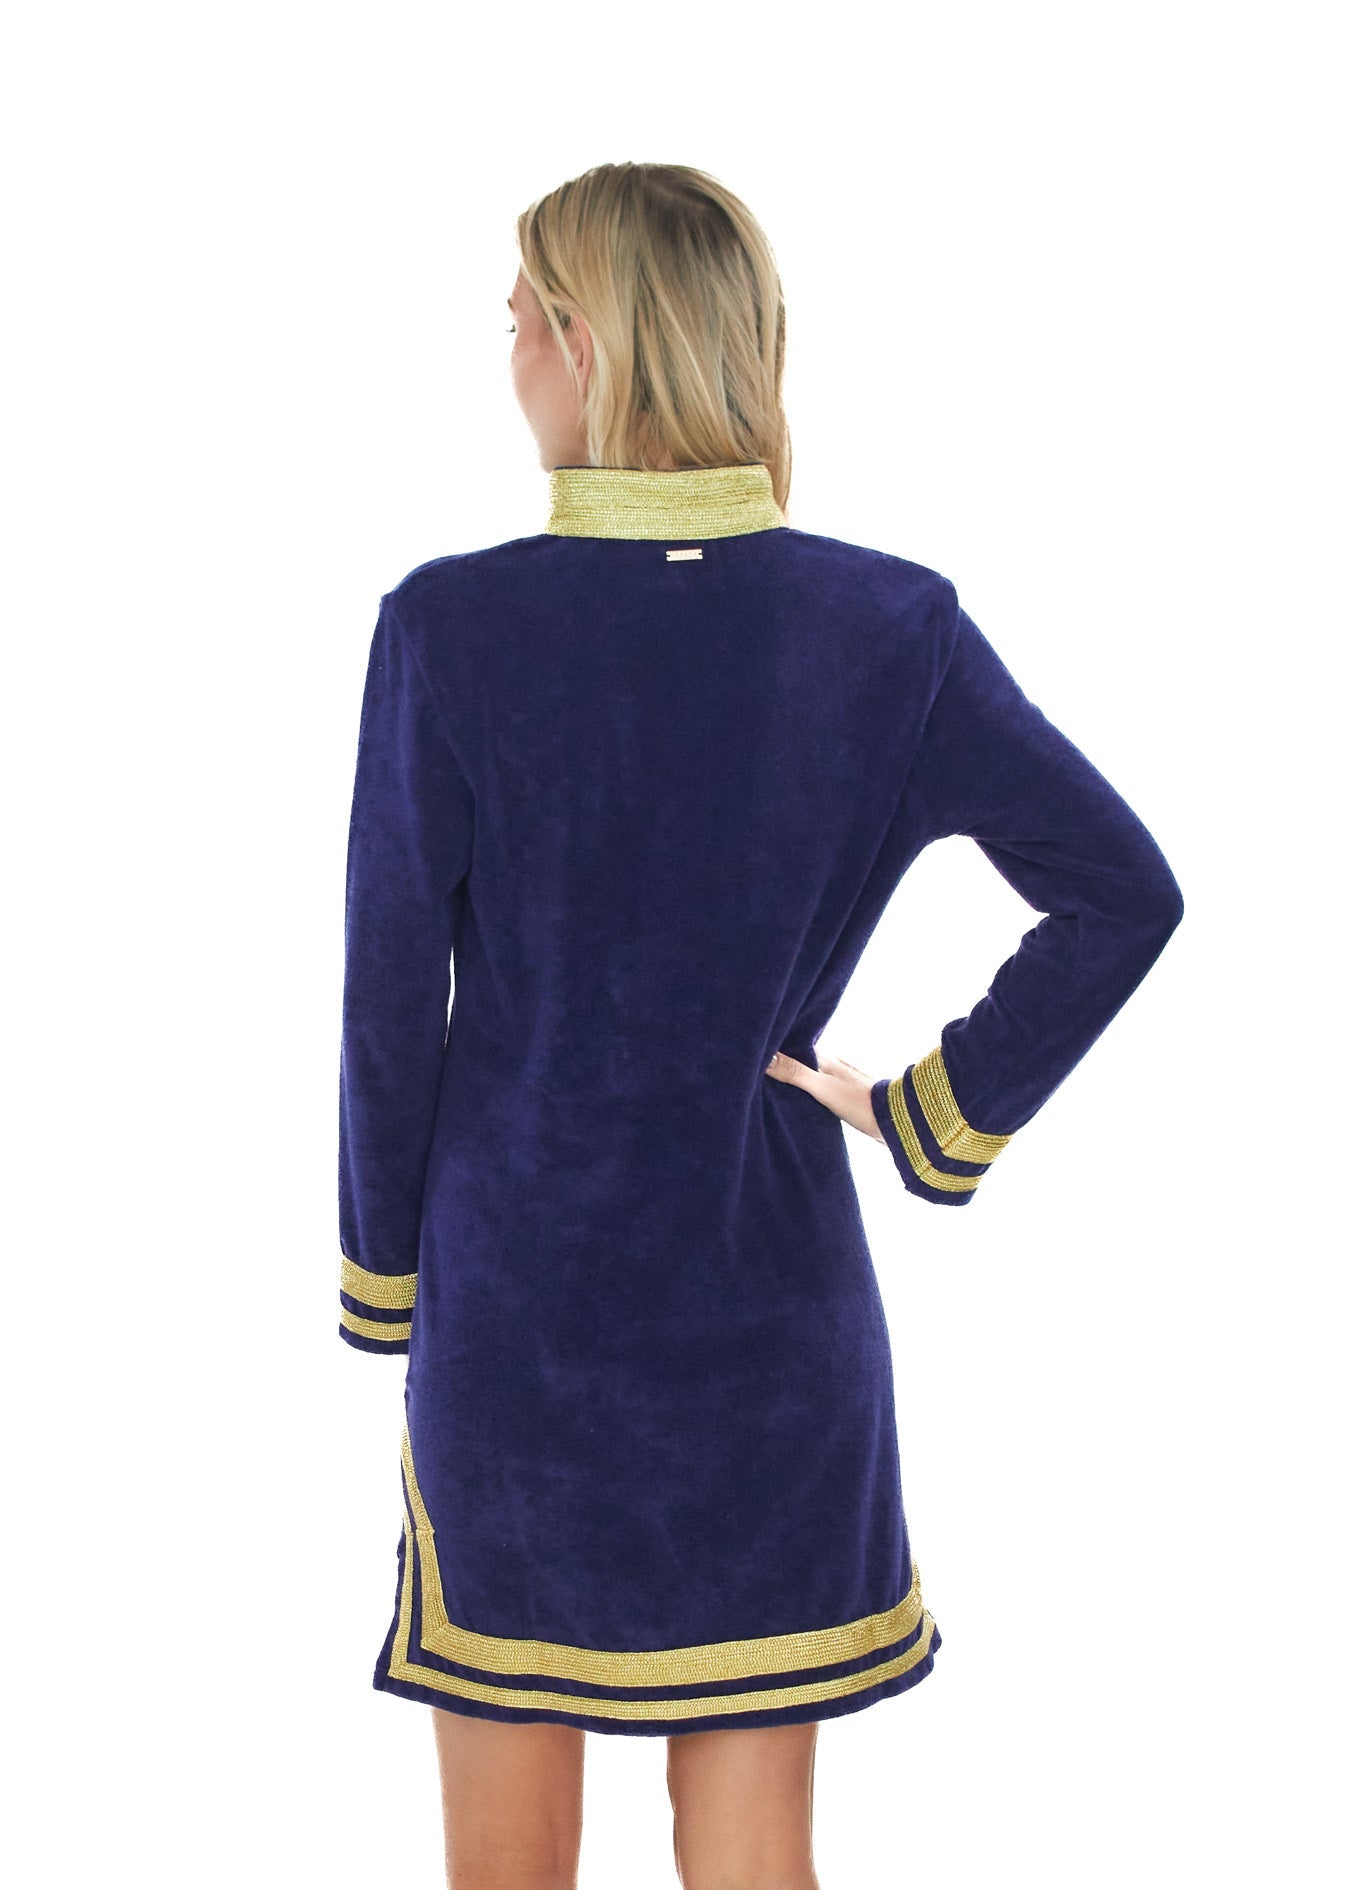 The back view of the sun protective Cabana Life Navy/Gold Terry Tunic. 